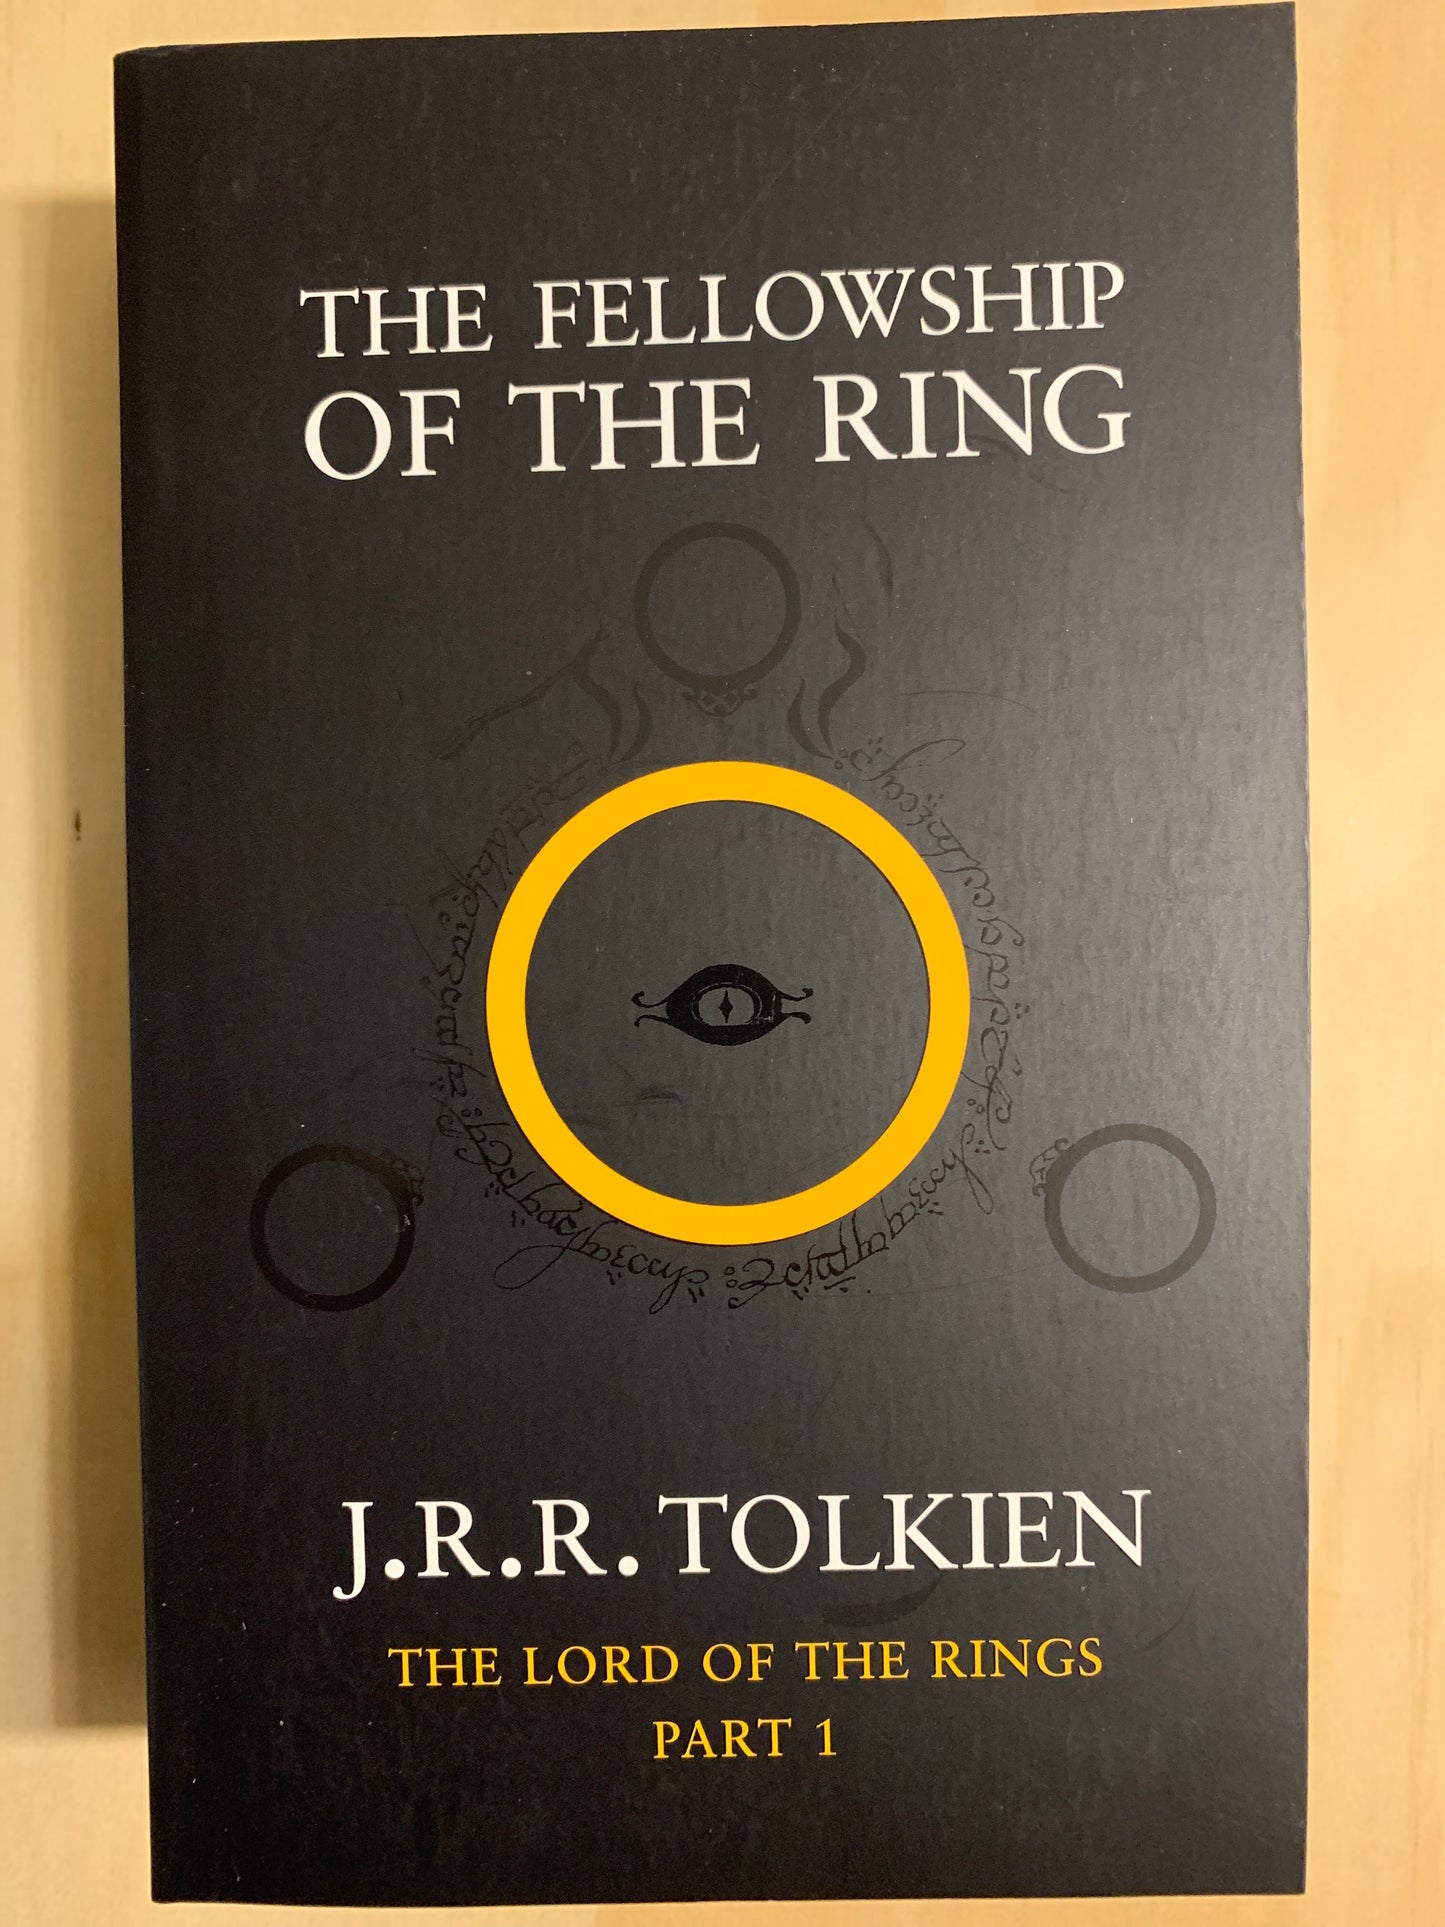 The Lord of the Rings part 1: The Fellowship Of The Ring